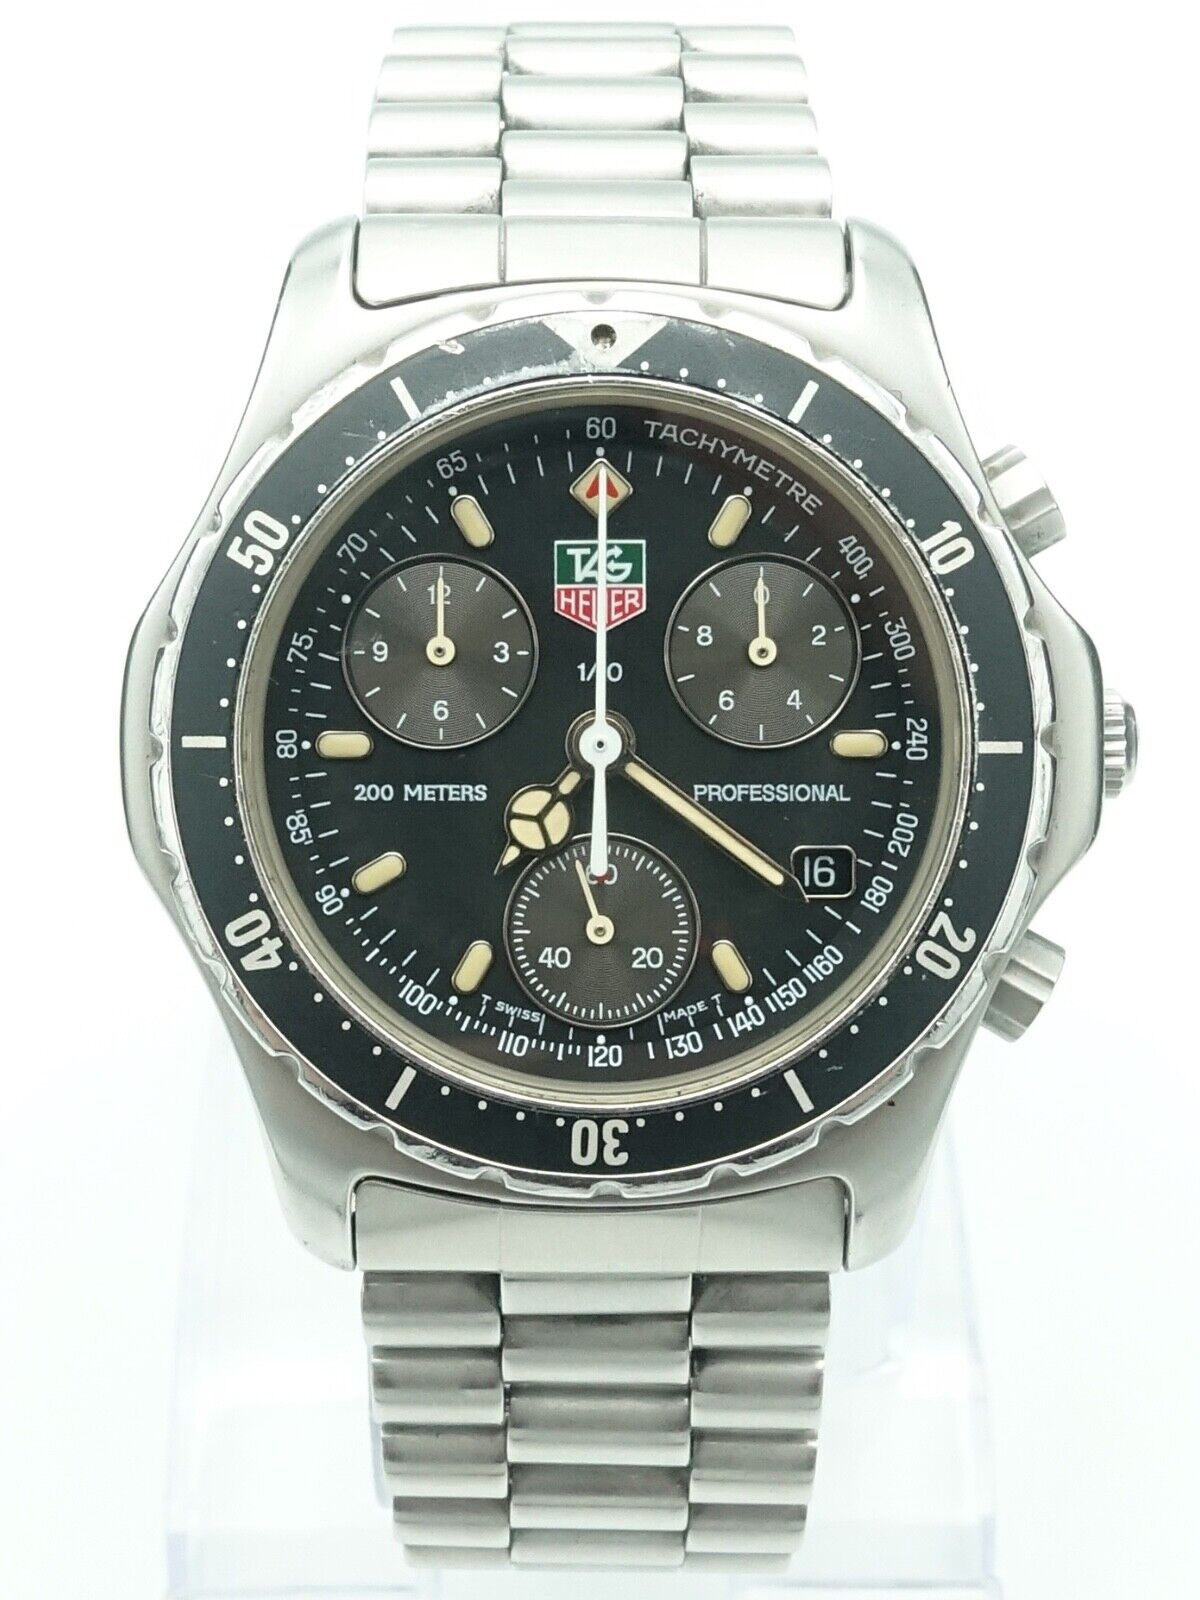 Vintage Tag Heuer 2000 1/10 Chrono Watch, Ref 570.206, 90’s,38mm,Great Condition